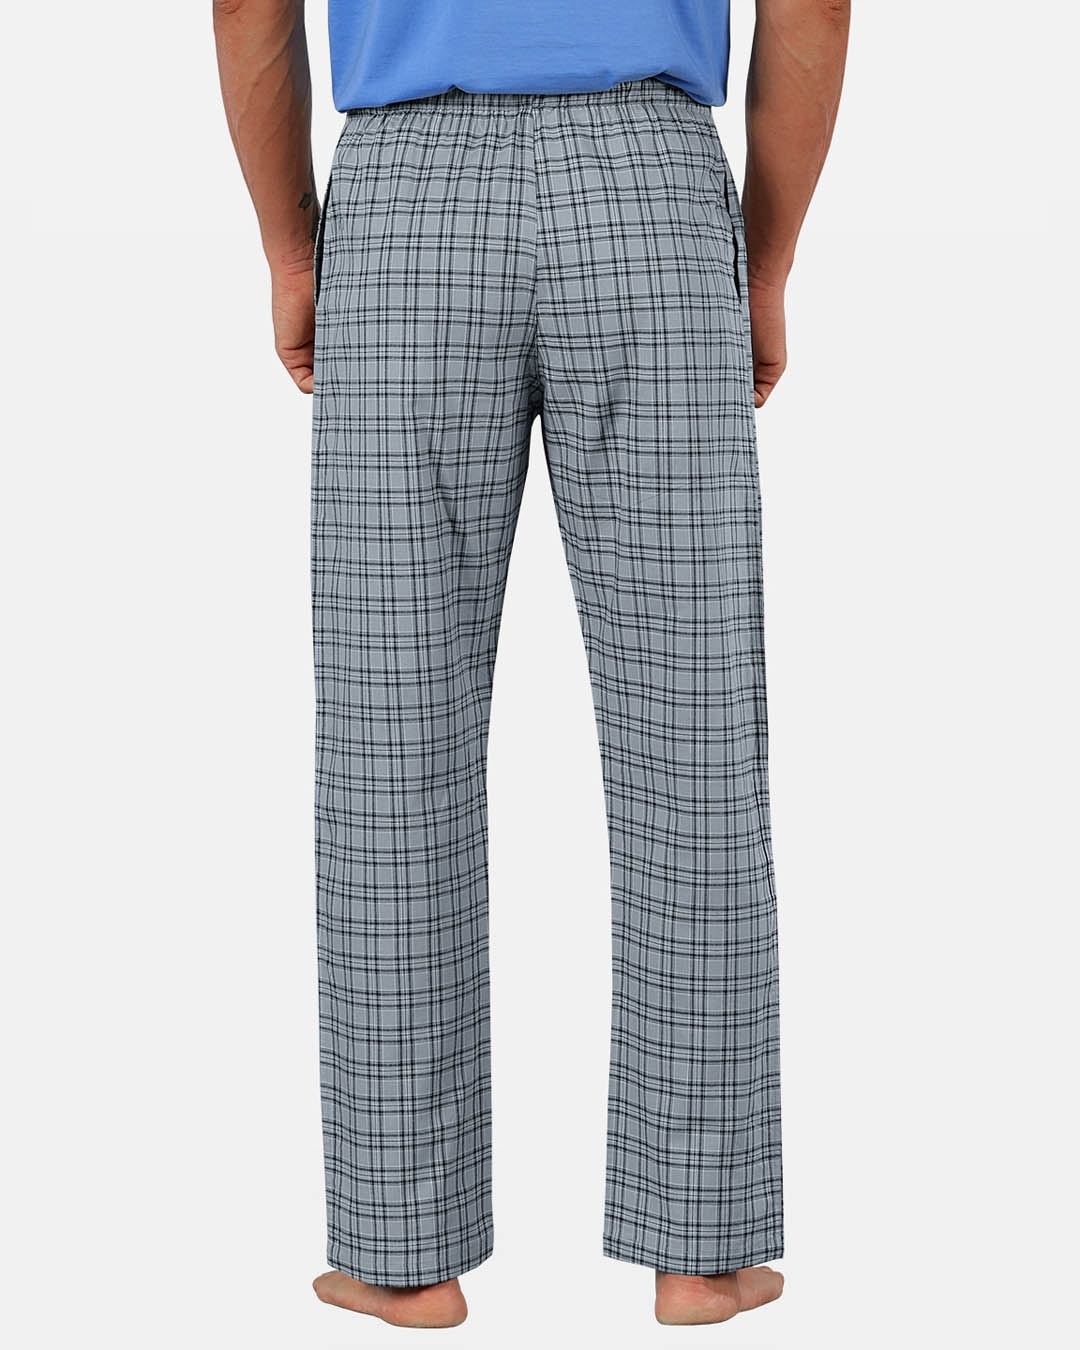 Shop Super Combed Cotton Checkered Pyjama For Men (Pack Of 2)